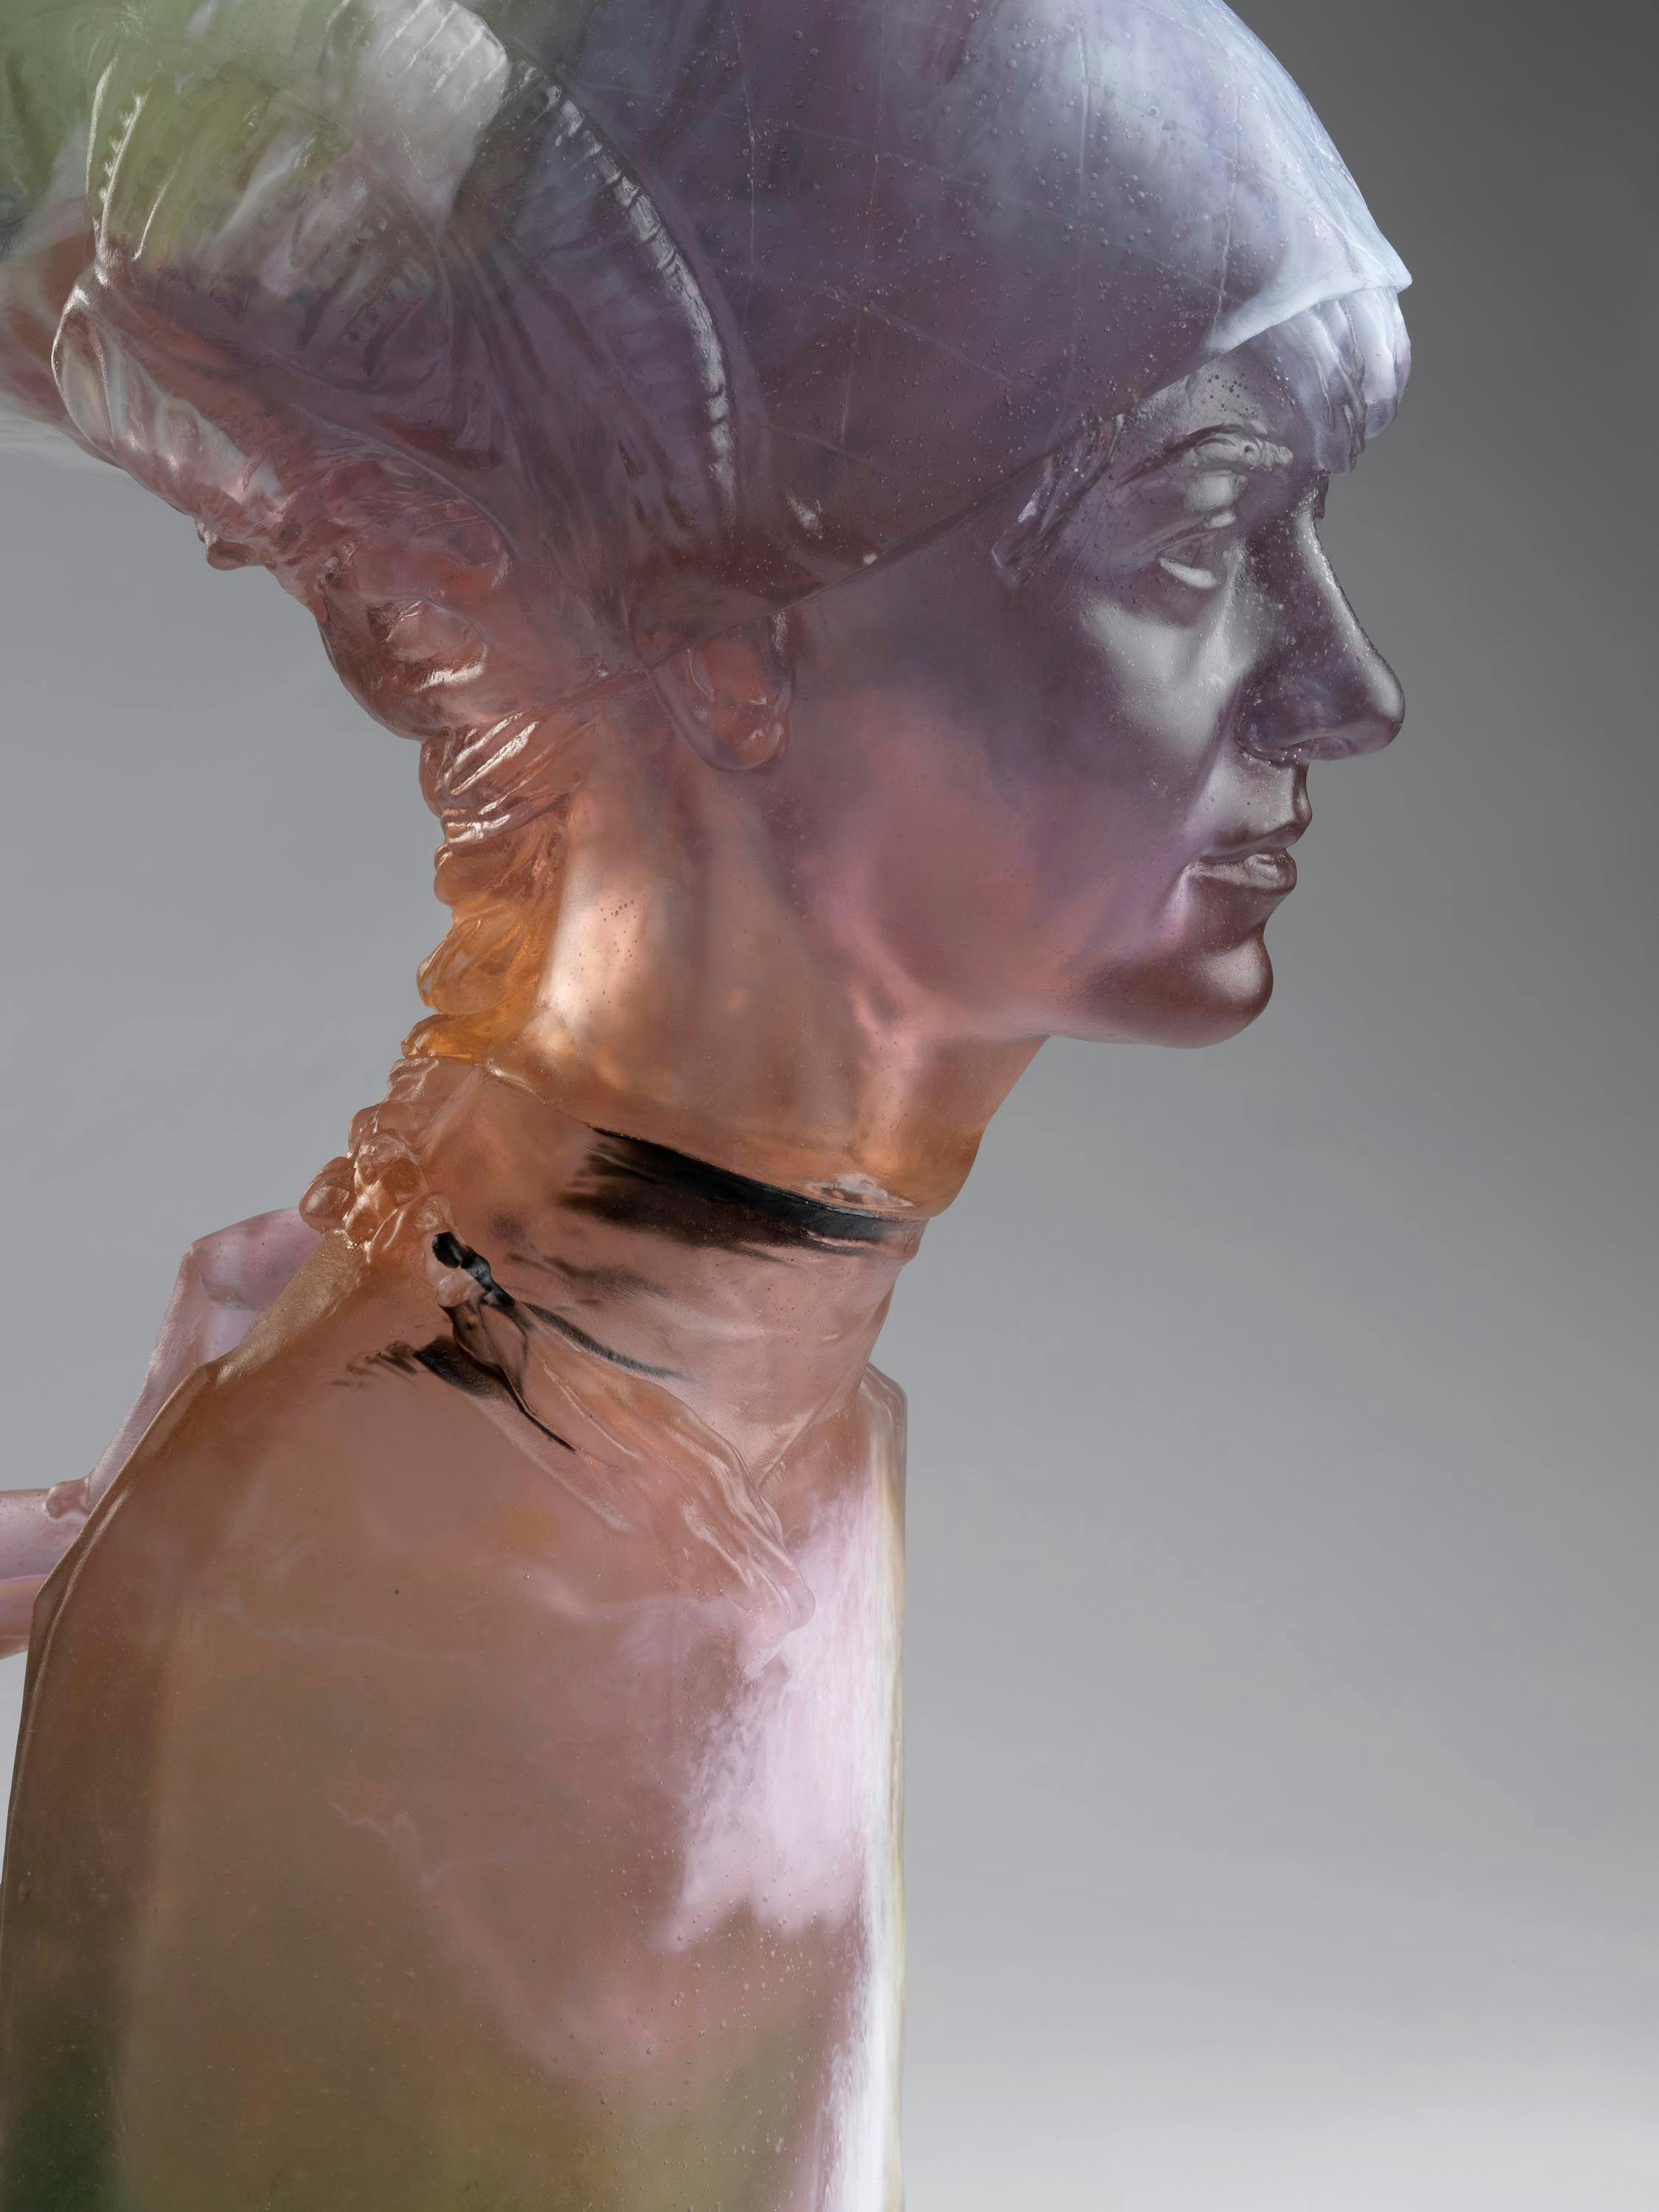 A sculpture by Andra Ursuta, titled Impersonal Growth, dated 2020.